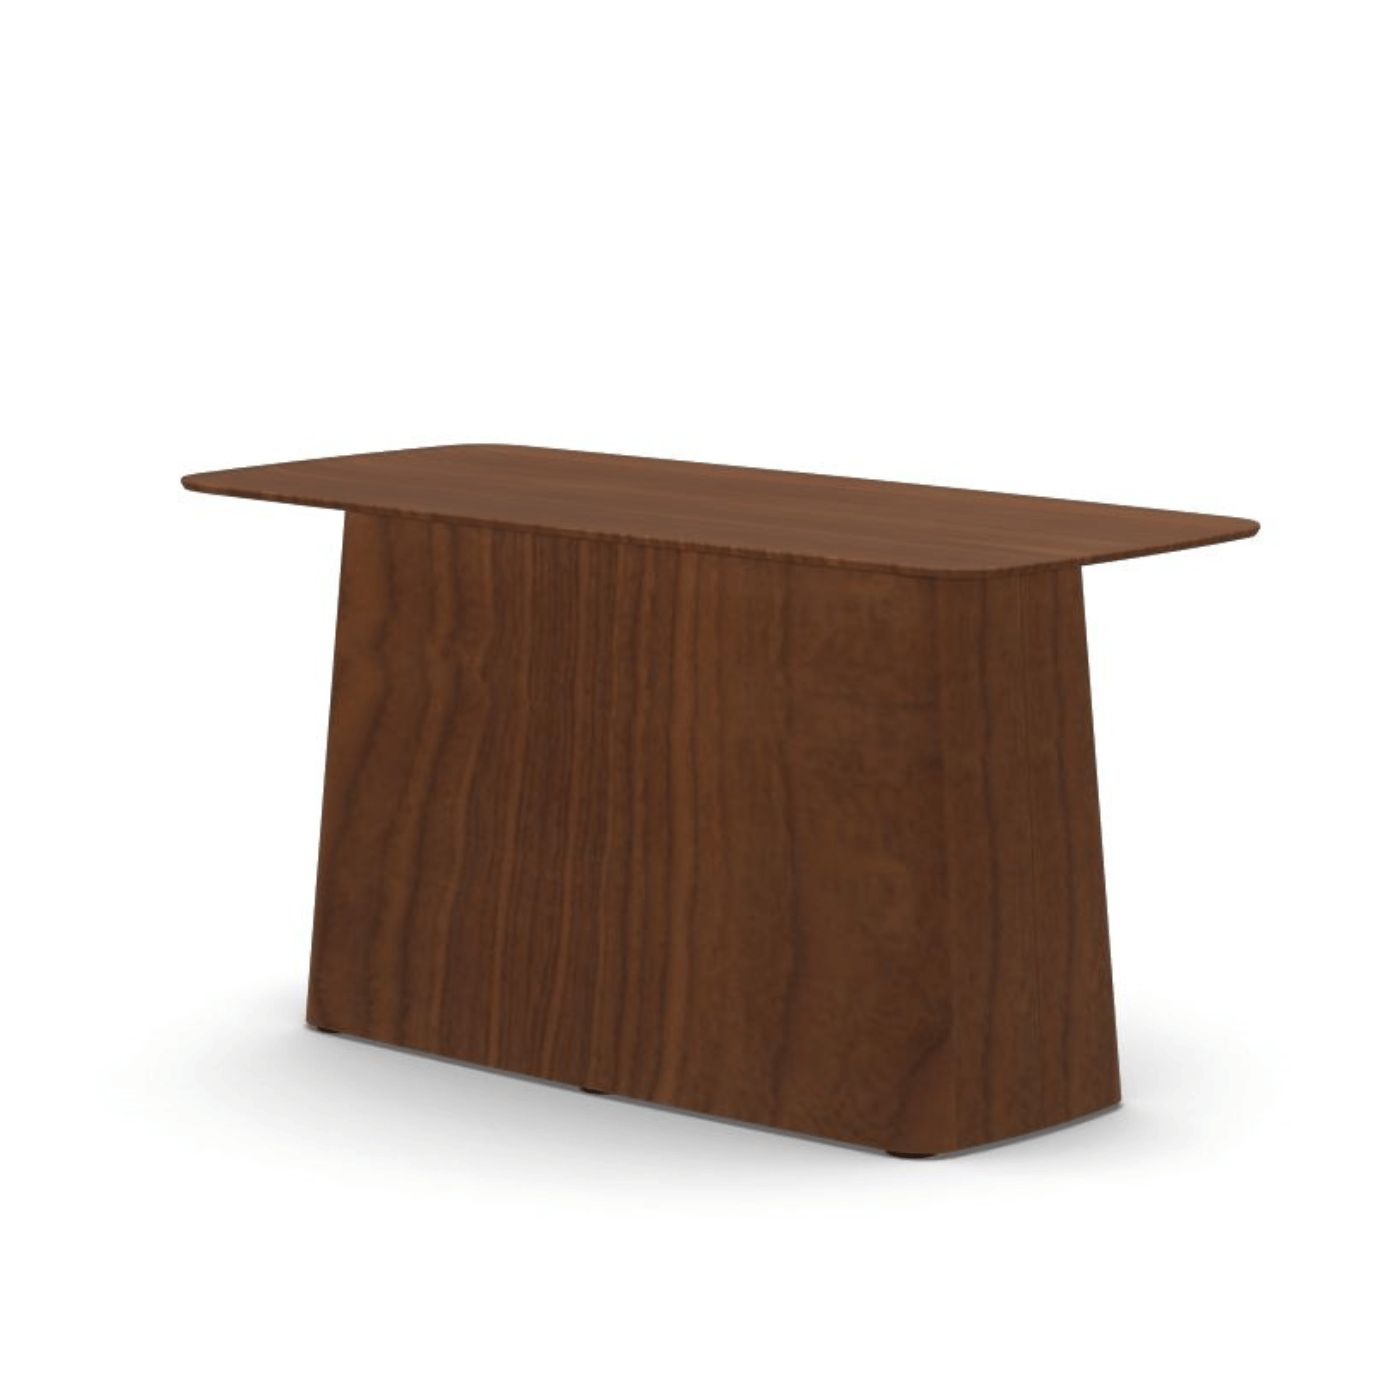 Vitra Wooden Side Table Large Black Pigmented Walnut Designer Furniture From Holloways Of Ludlow